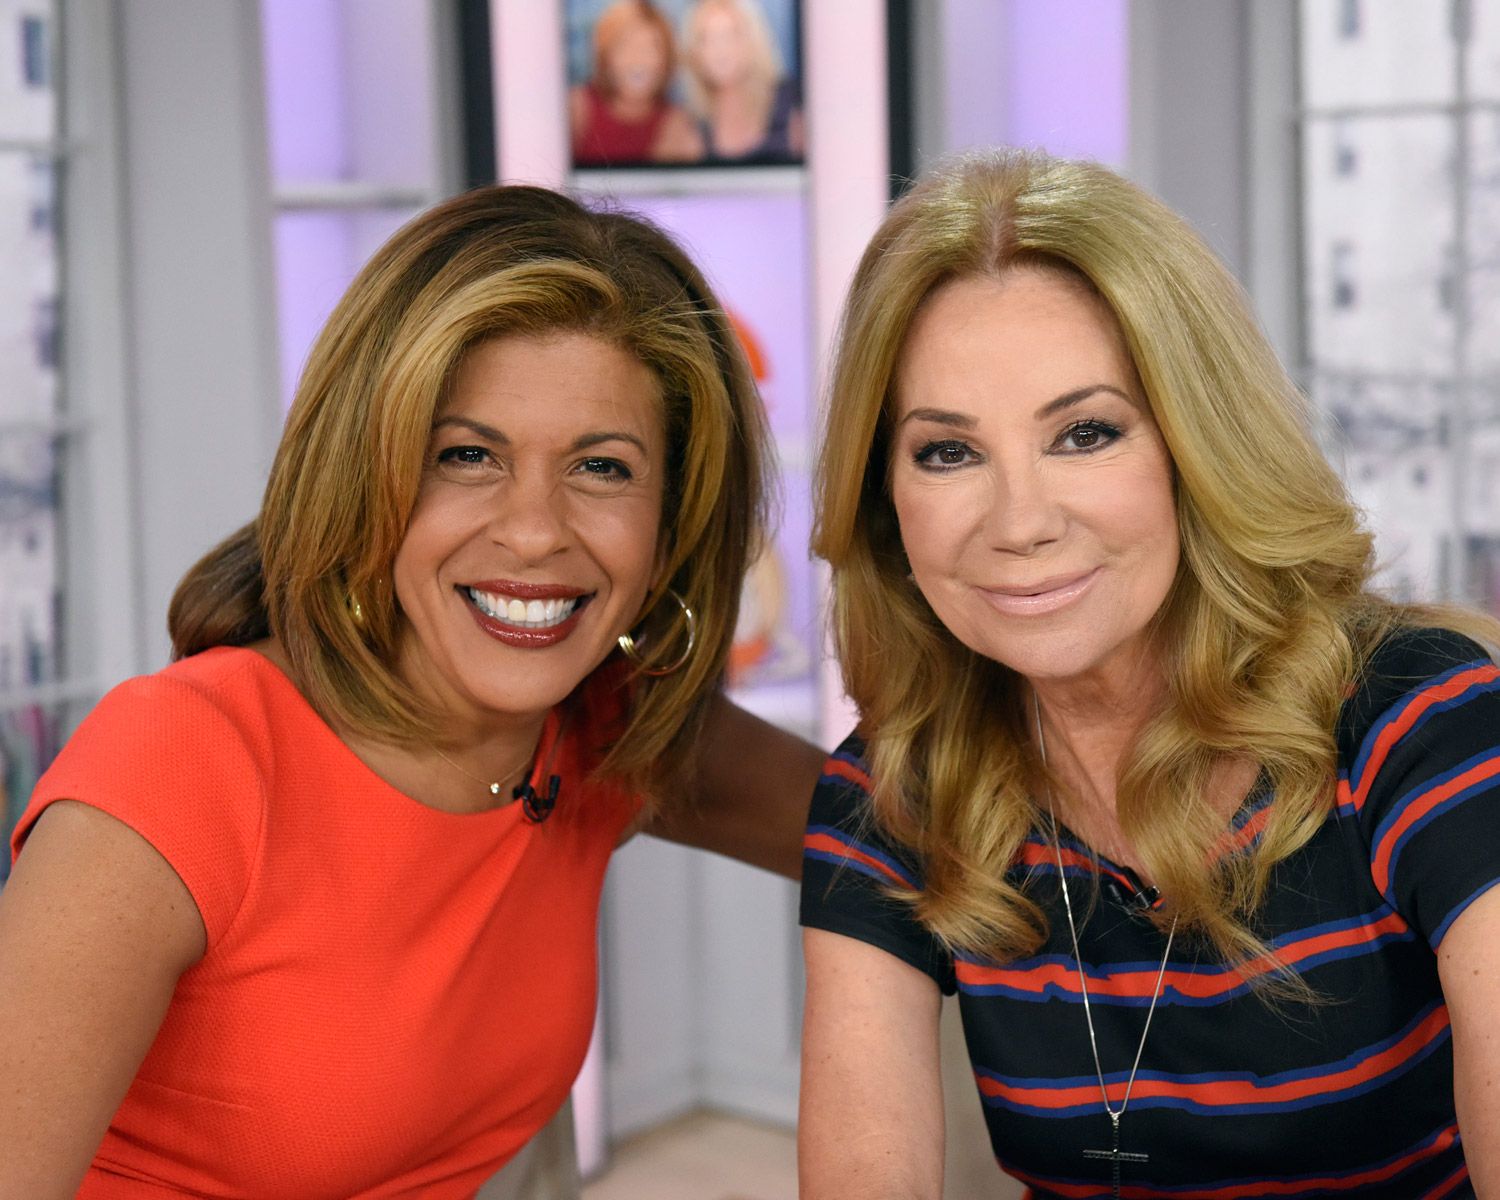 Kathie Lee Gifford's Replacement On 'Today' Is Revealed.